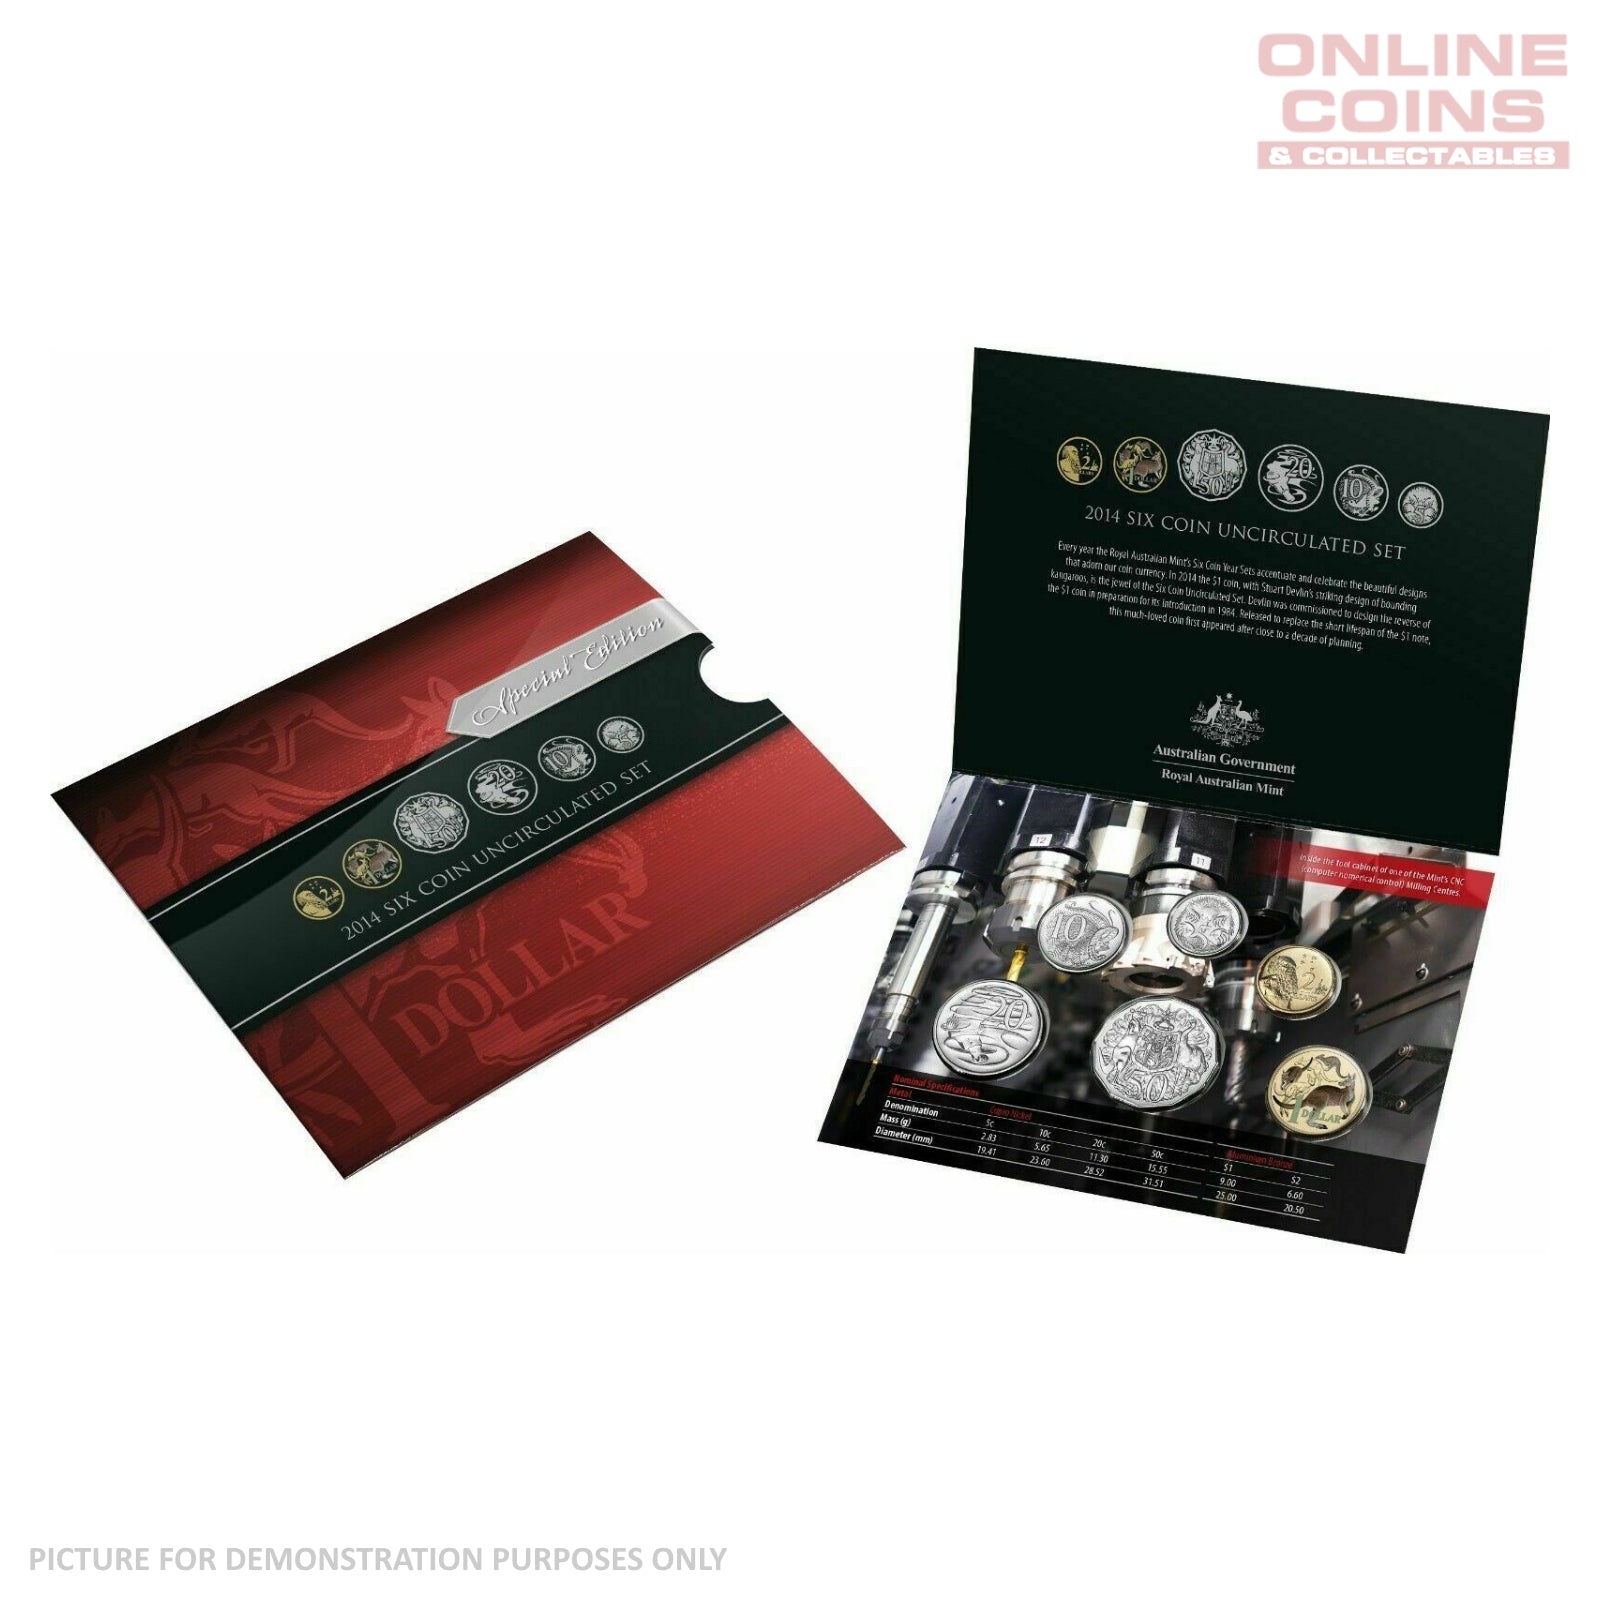 2014 Uncirculated Coin Year Set - Special Edition